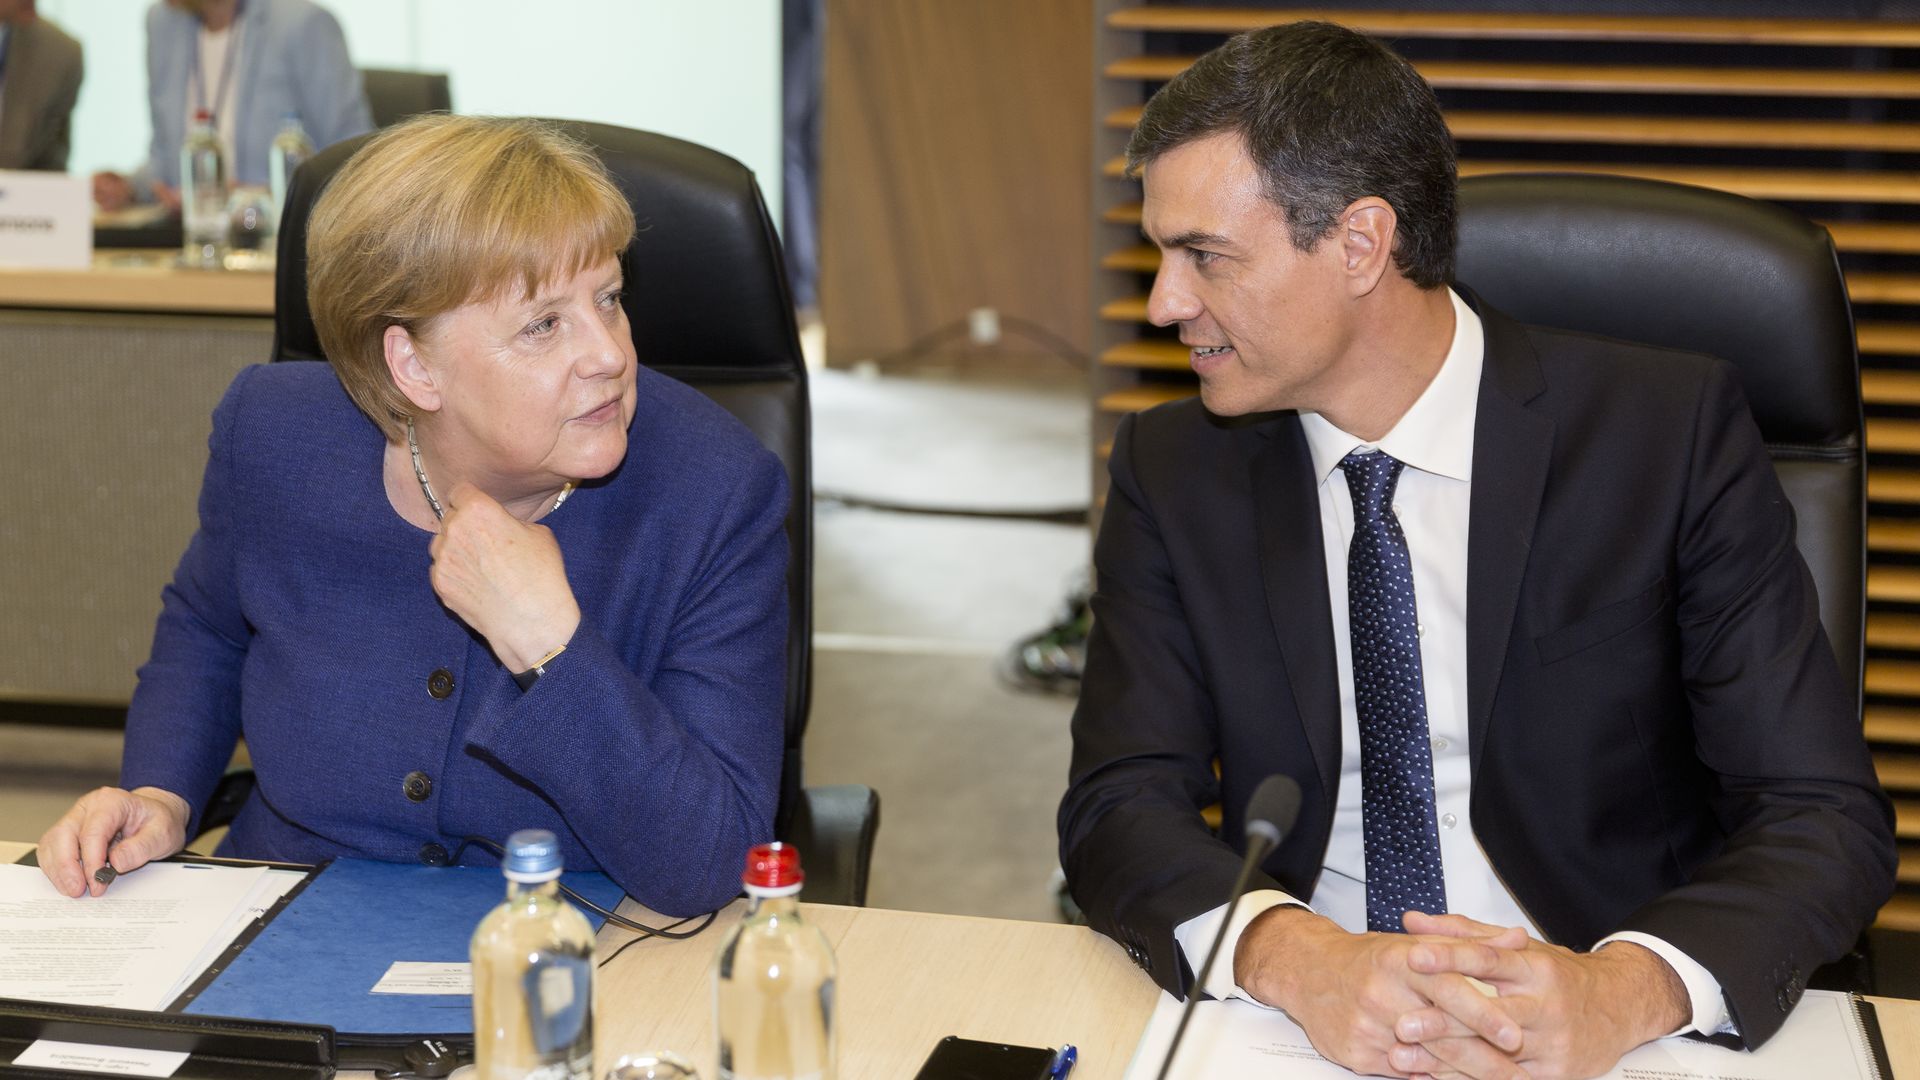 German Chancellor Angela Merkel and Spanish Prime Minister Pedro Sanchez at a meeting on migration and asylum issues in Brussels, Belgium. Photo: Thierry Monasse/Getty Images